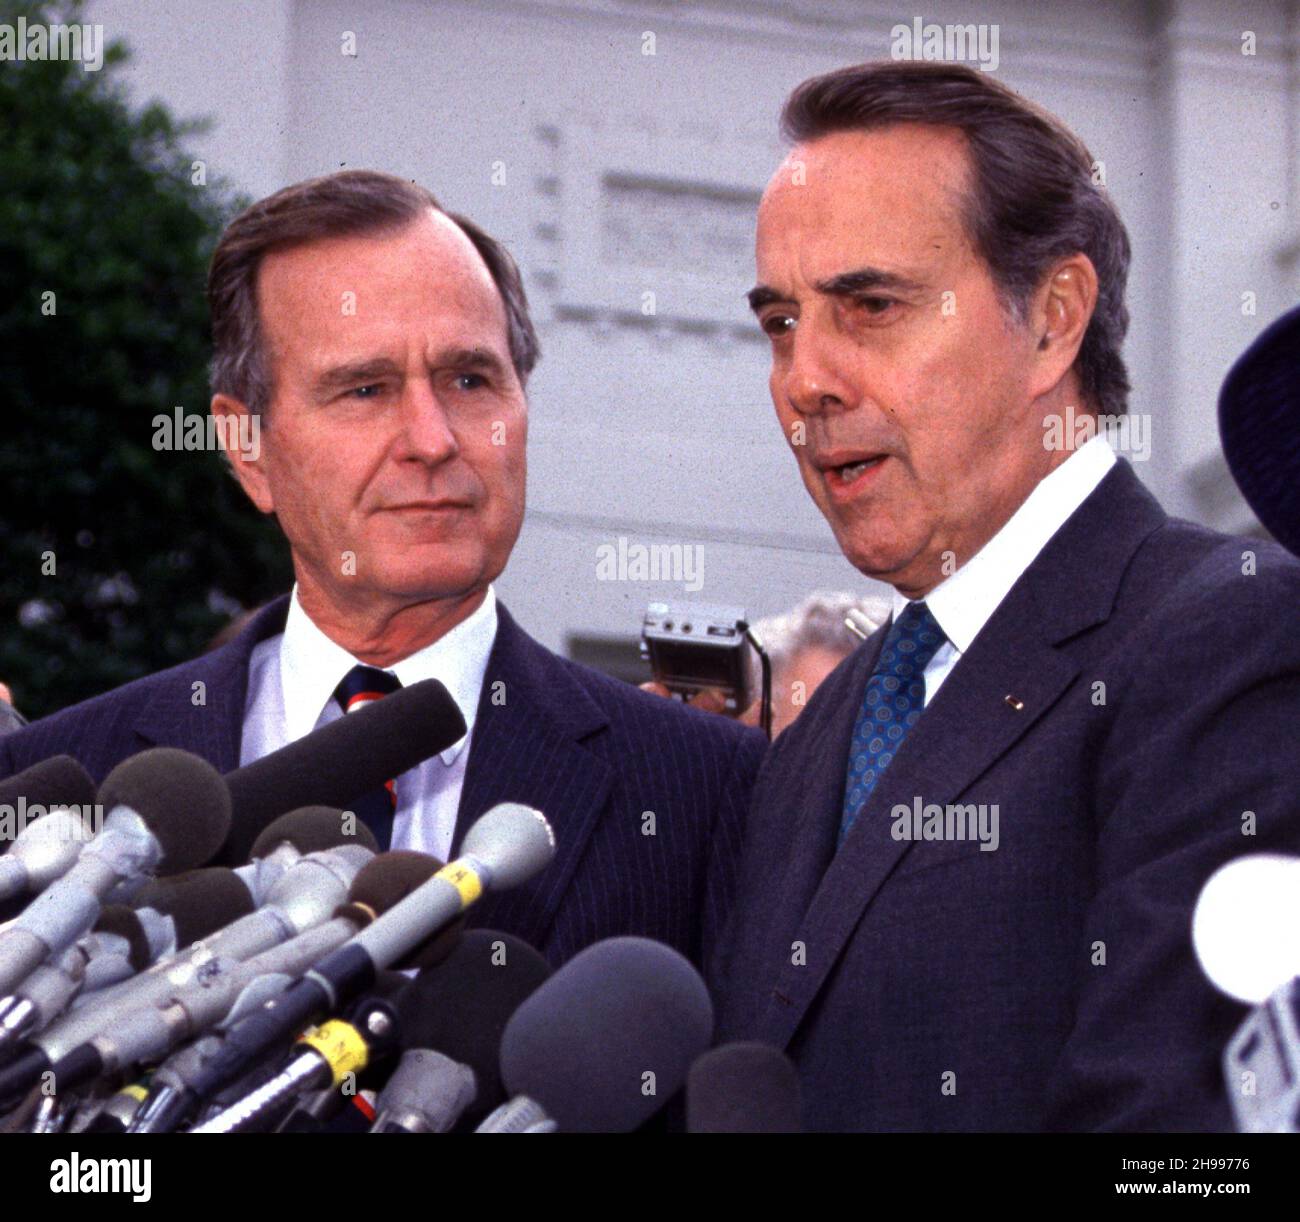 **FILE PHOTO** Bob Dole Has Passed Away at 98. United States President-elect George H.W. Bush and U.S. Senate Minority Leader Bob Dole (Republican of Kansas) meet reporters after their luncheon meeting in the Old Executive Office Building in Washington, DC on November 28, 1988.Credit: Ron Sachs /MediaPunch Stock Photo